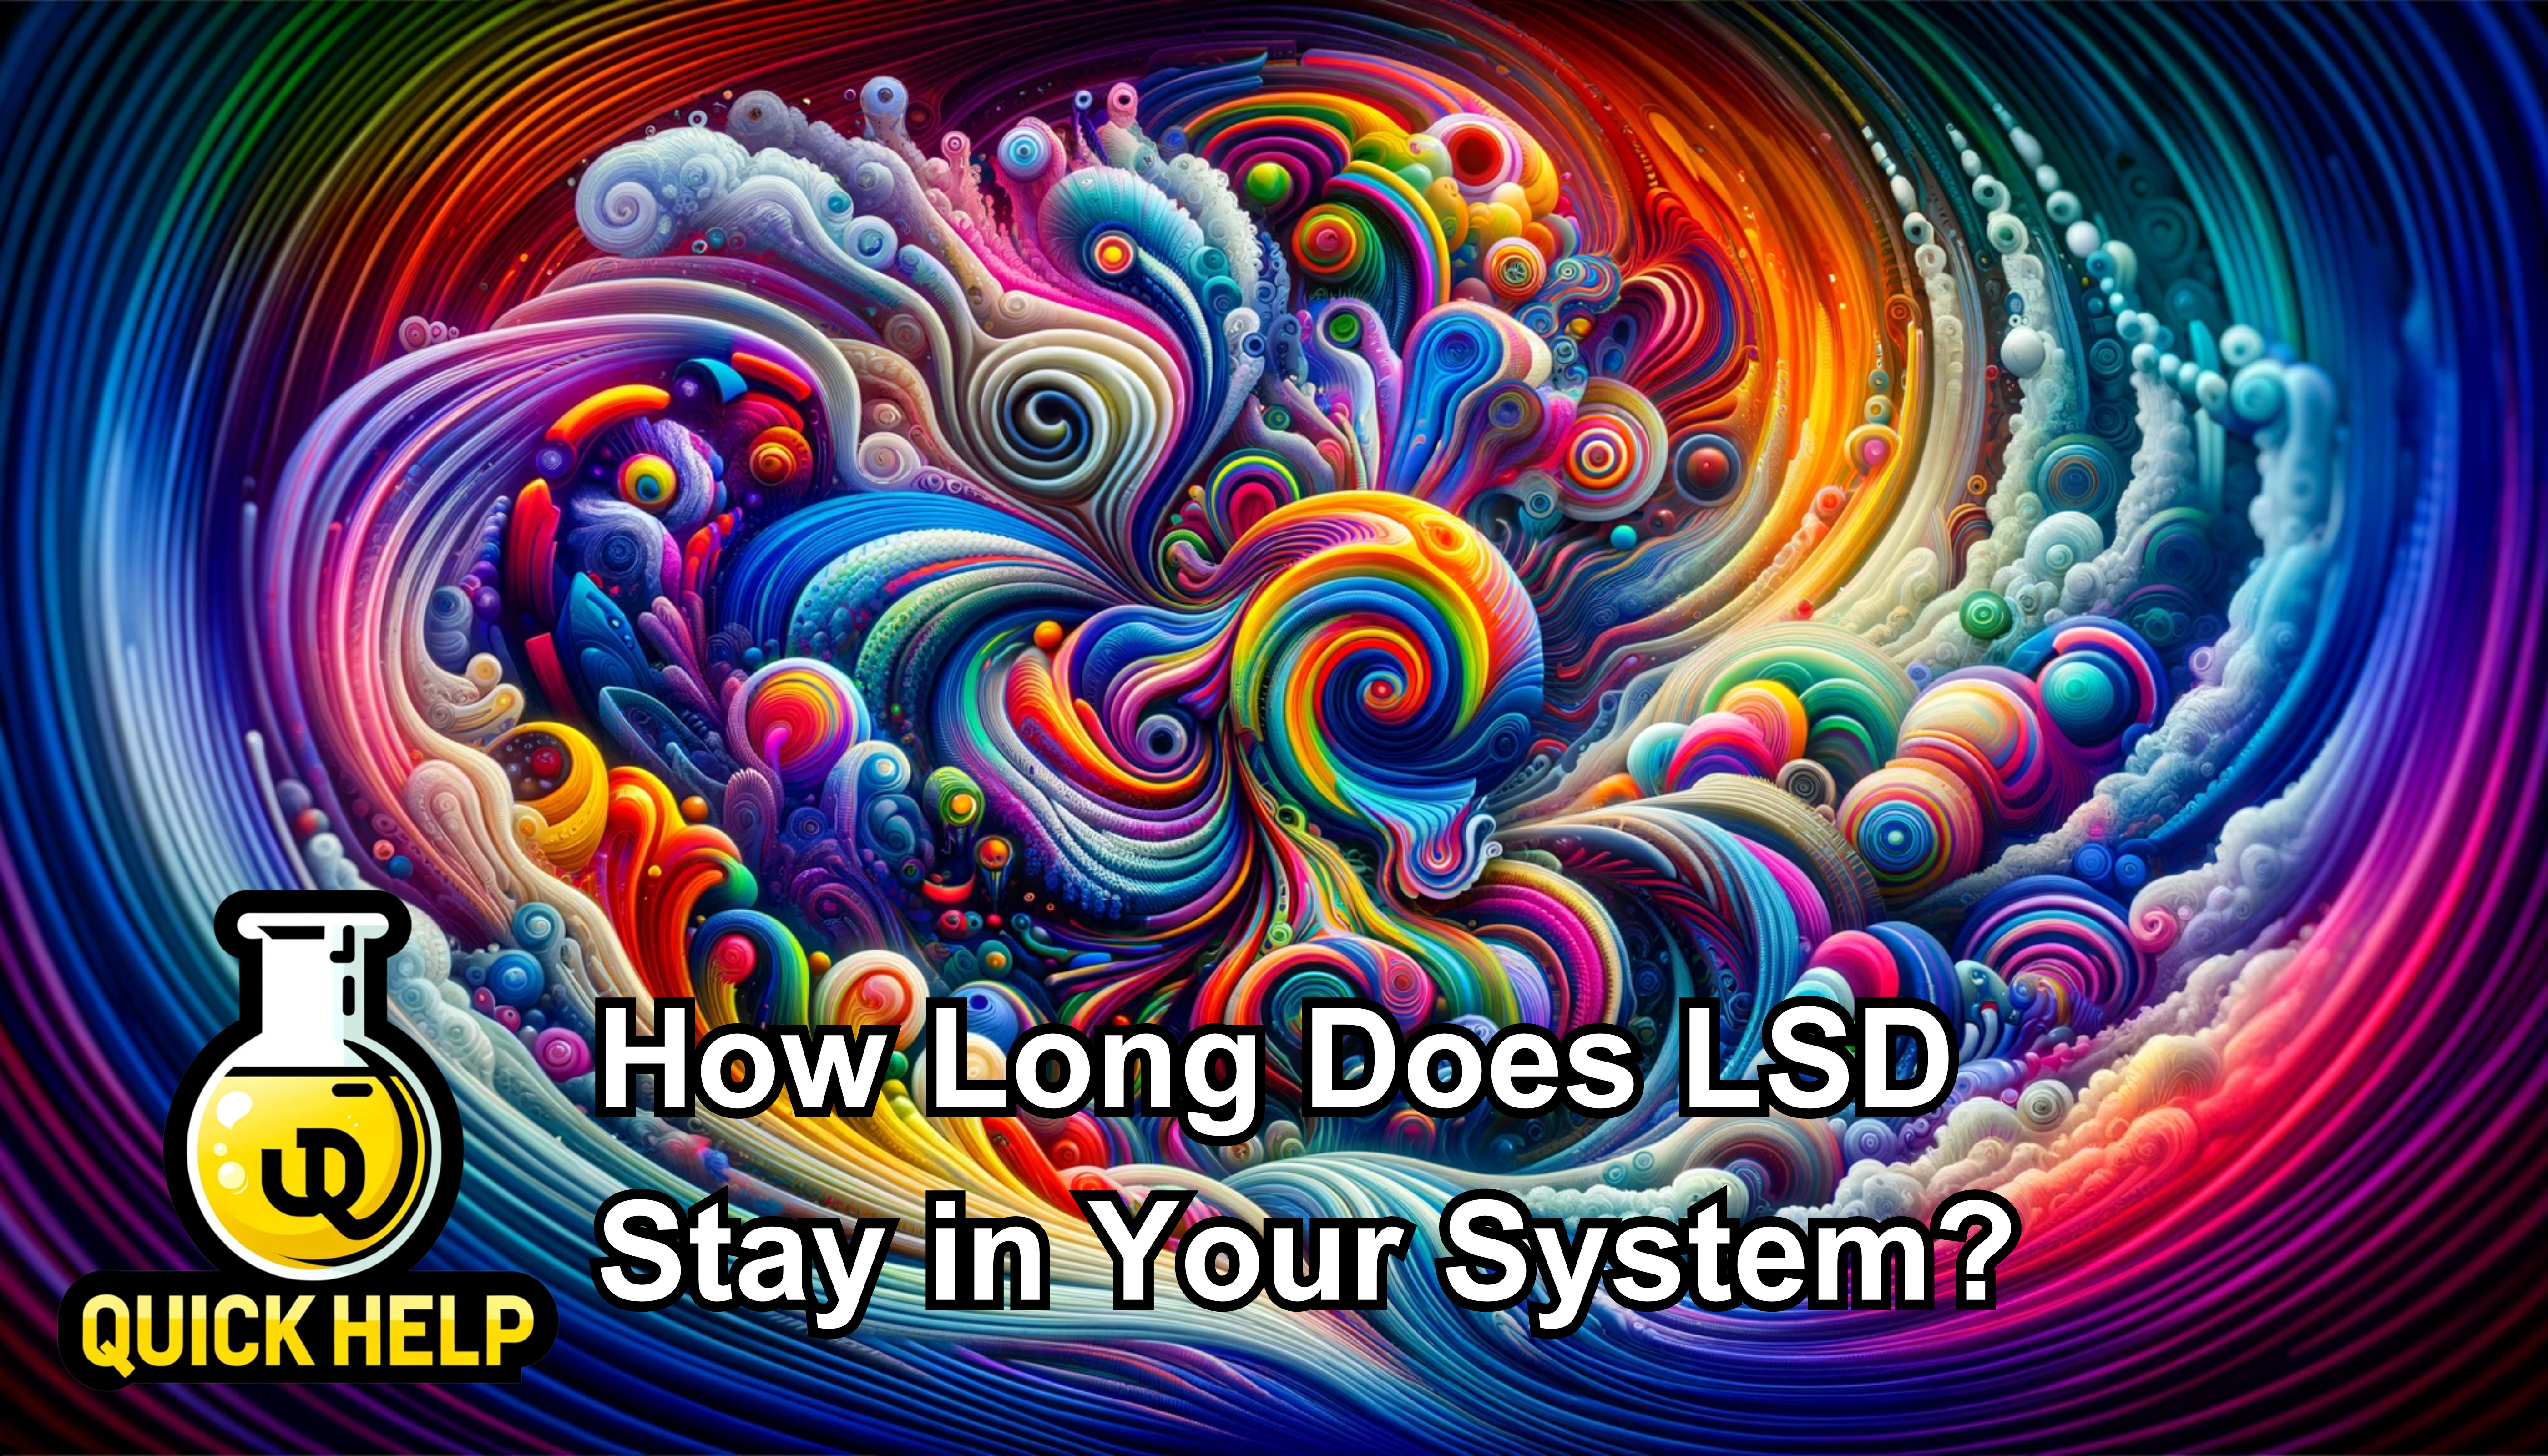 How Long Does LCD Stay in Your System? (Urine)